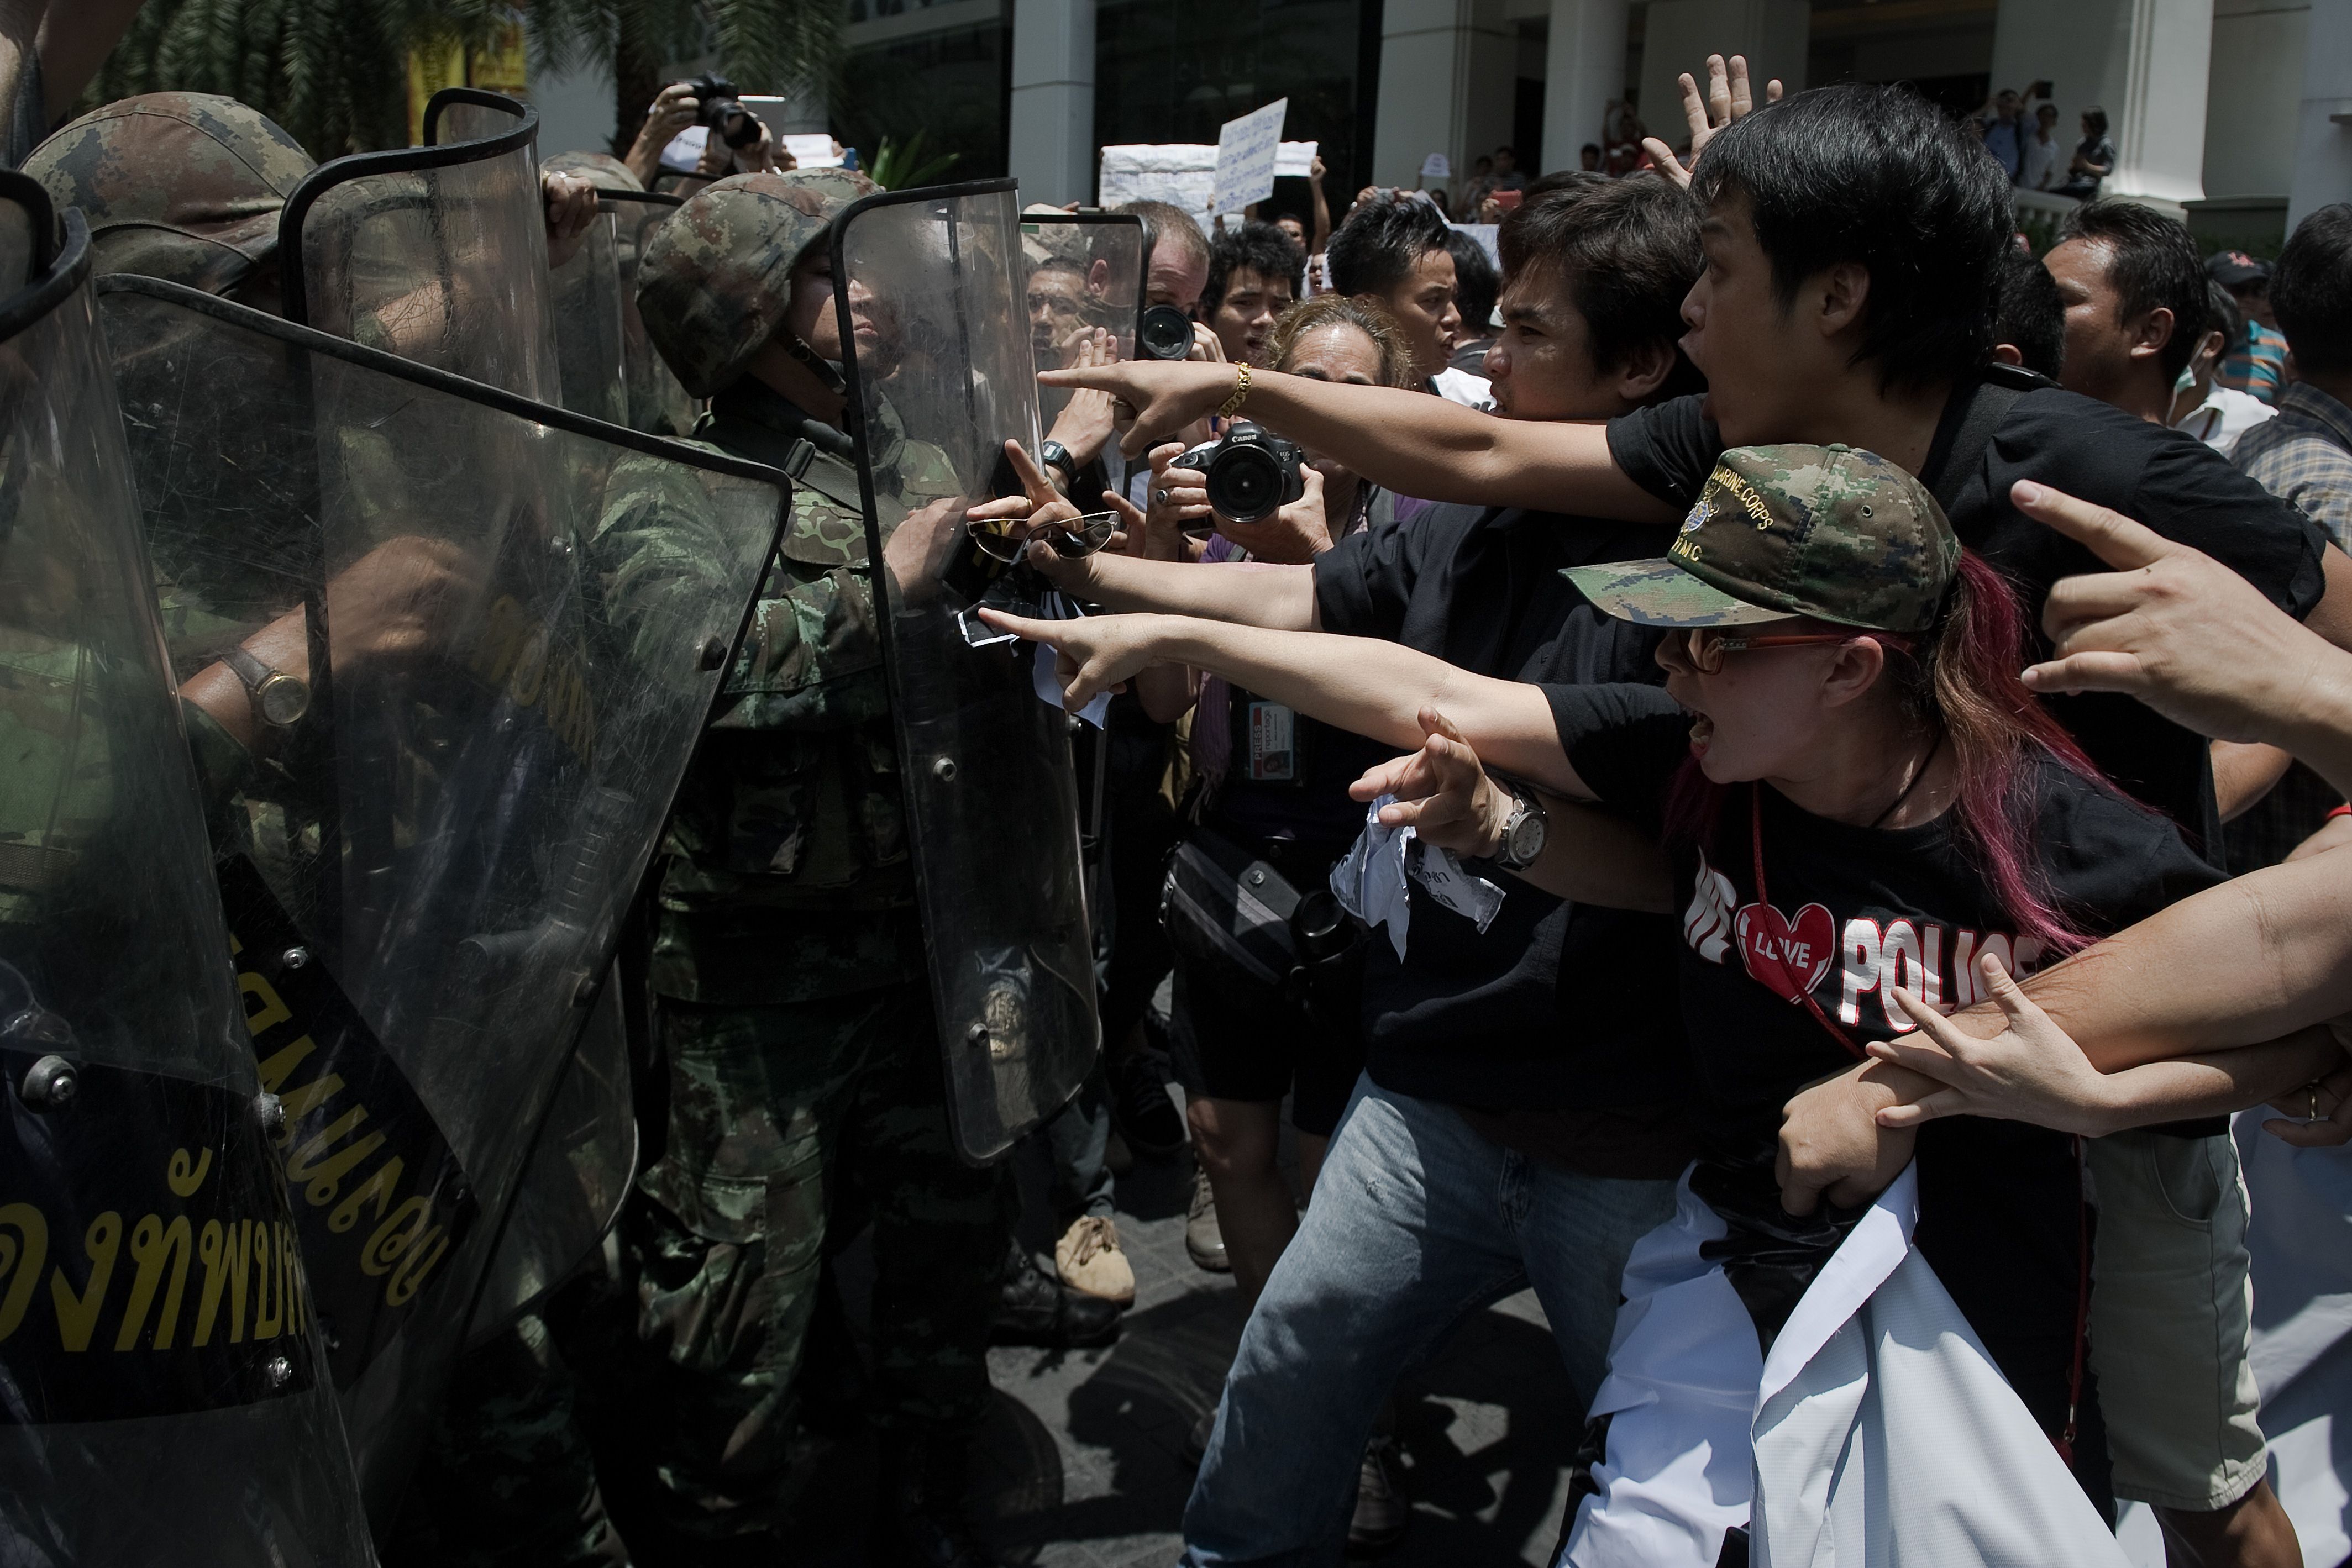 Thai soldiers scuffle with anti coup protesters during a planned gathering in Bangkok on May 25, 2014. Thailand’s military junta said it had disbanded the Senate and placed all law-making authority in the hands of the army chief, dramatically tightening its grip after a coup that has sparked Bangkok protests and drawn international condemnation. AFP PHOTO/ Nicolas ASFOURI 